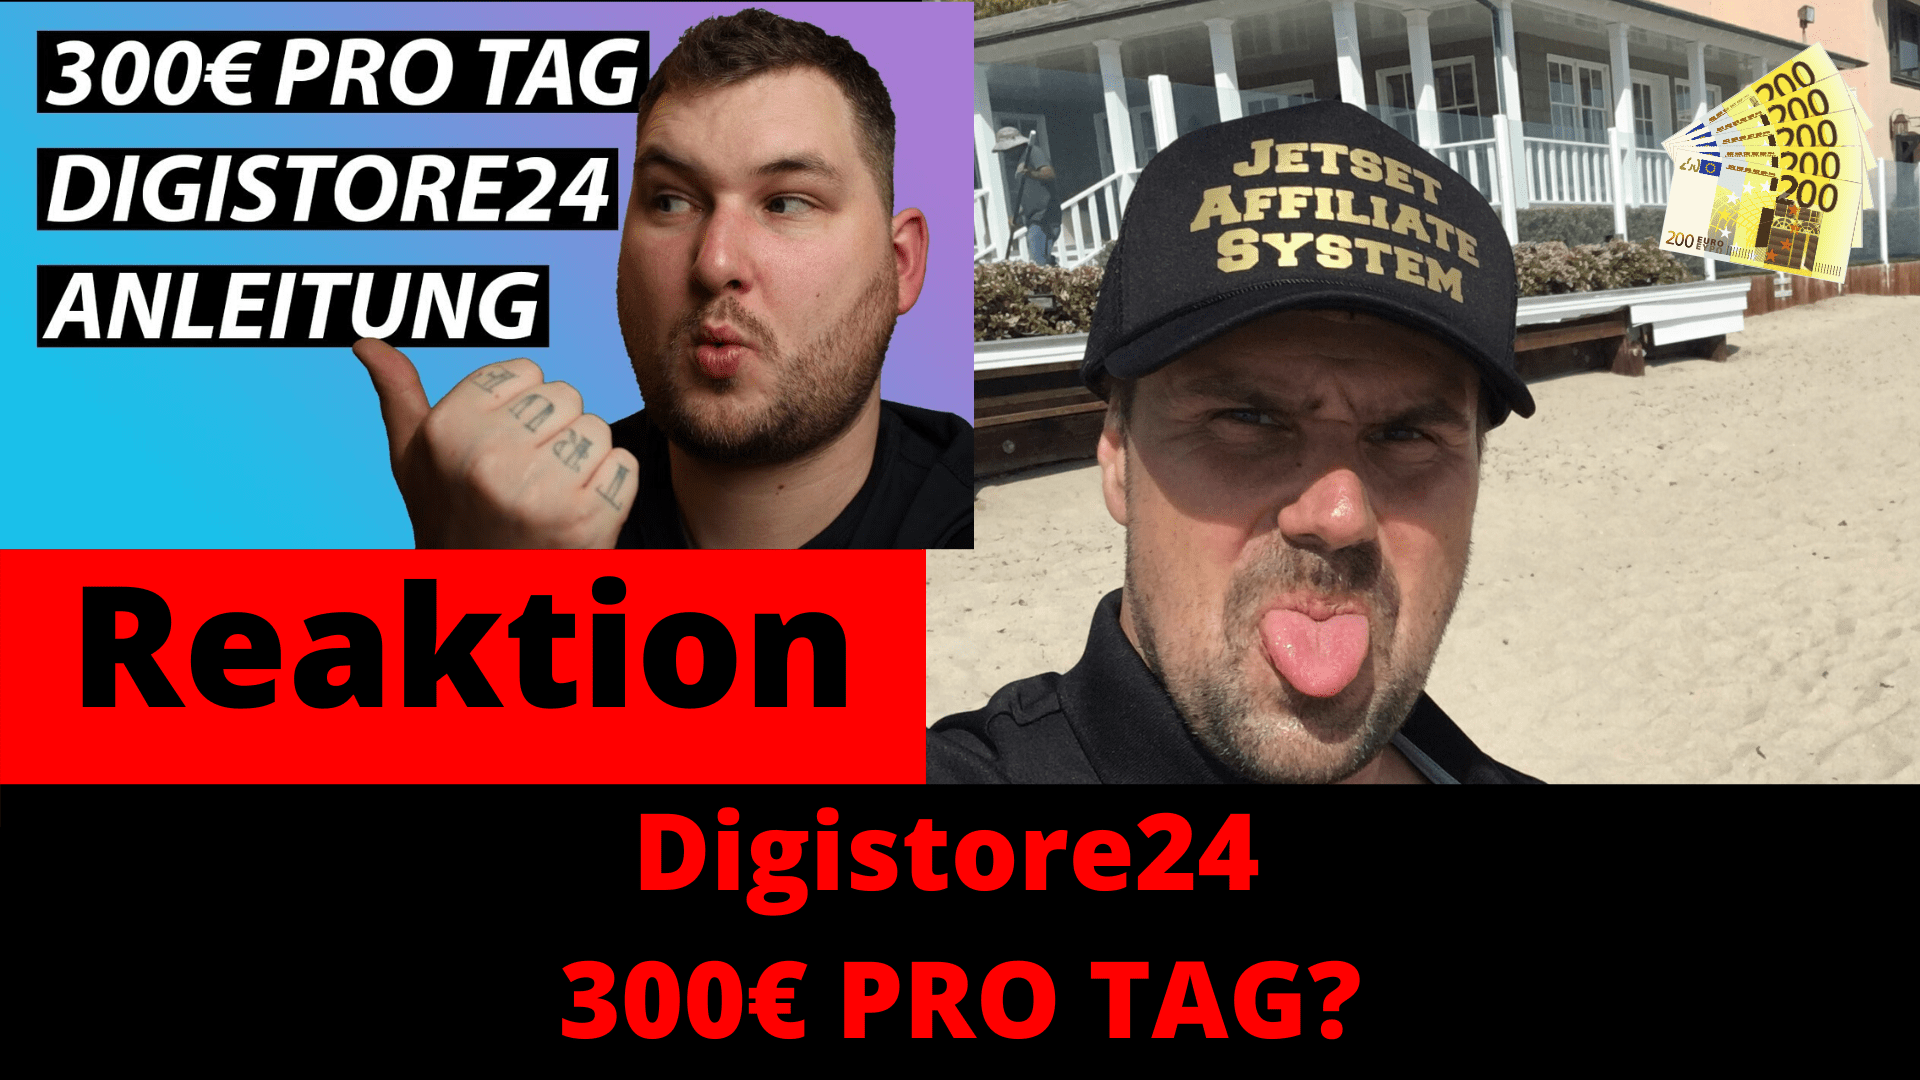 Digistore24 2020 Affiliate Anleitung - 300€ PRO TAG!